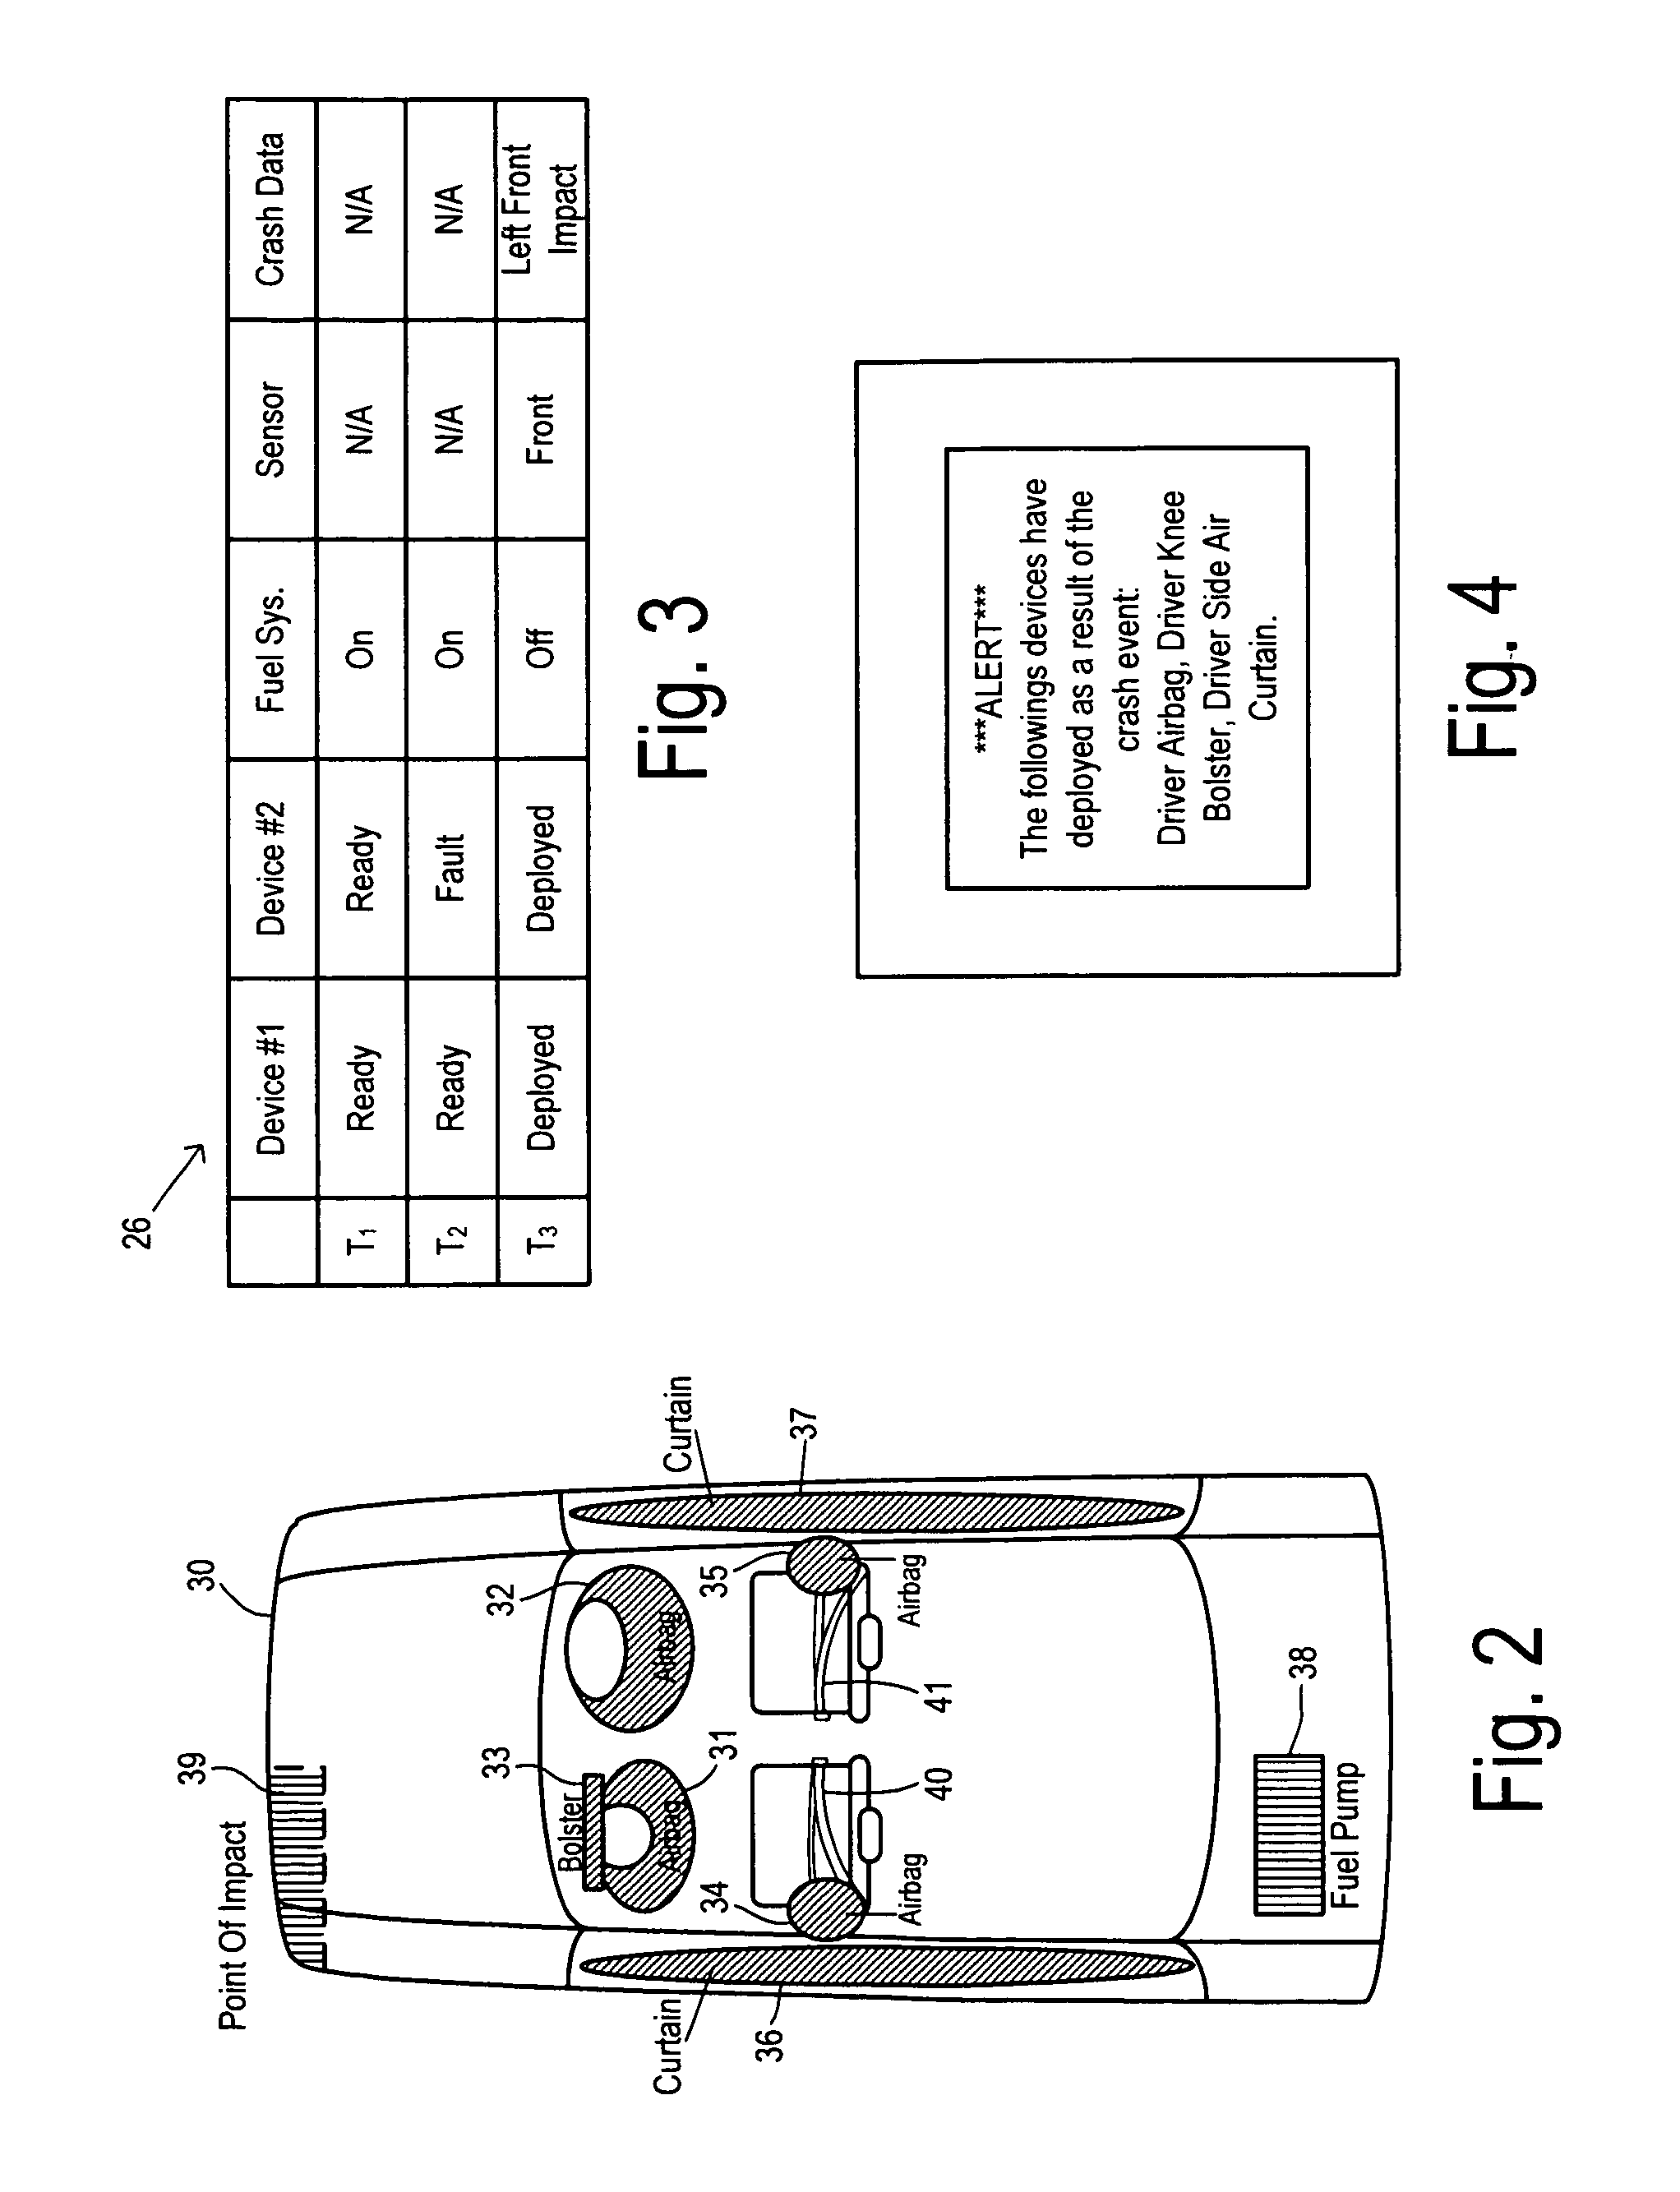 Vehicular safety systems status display